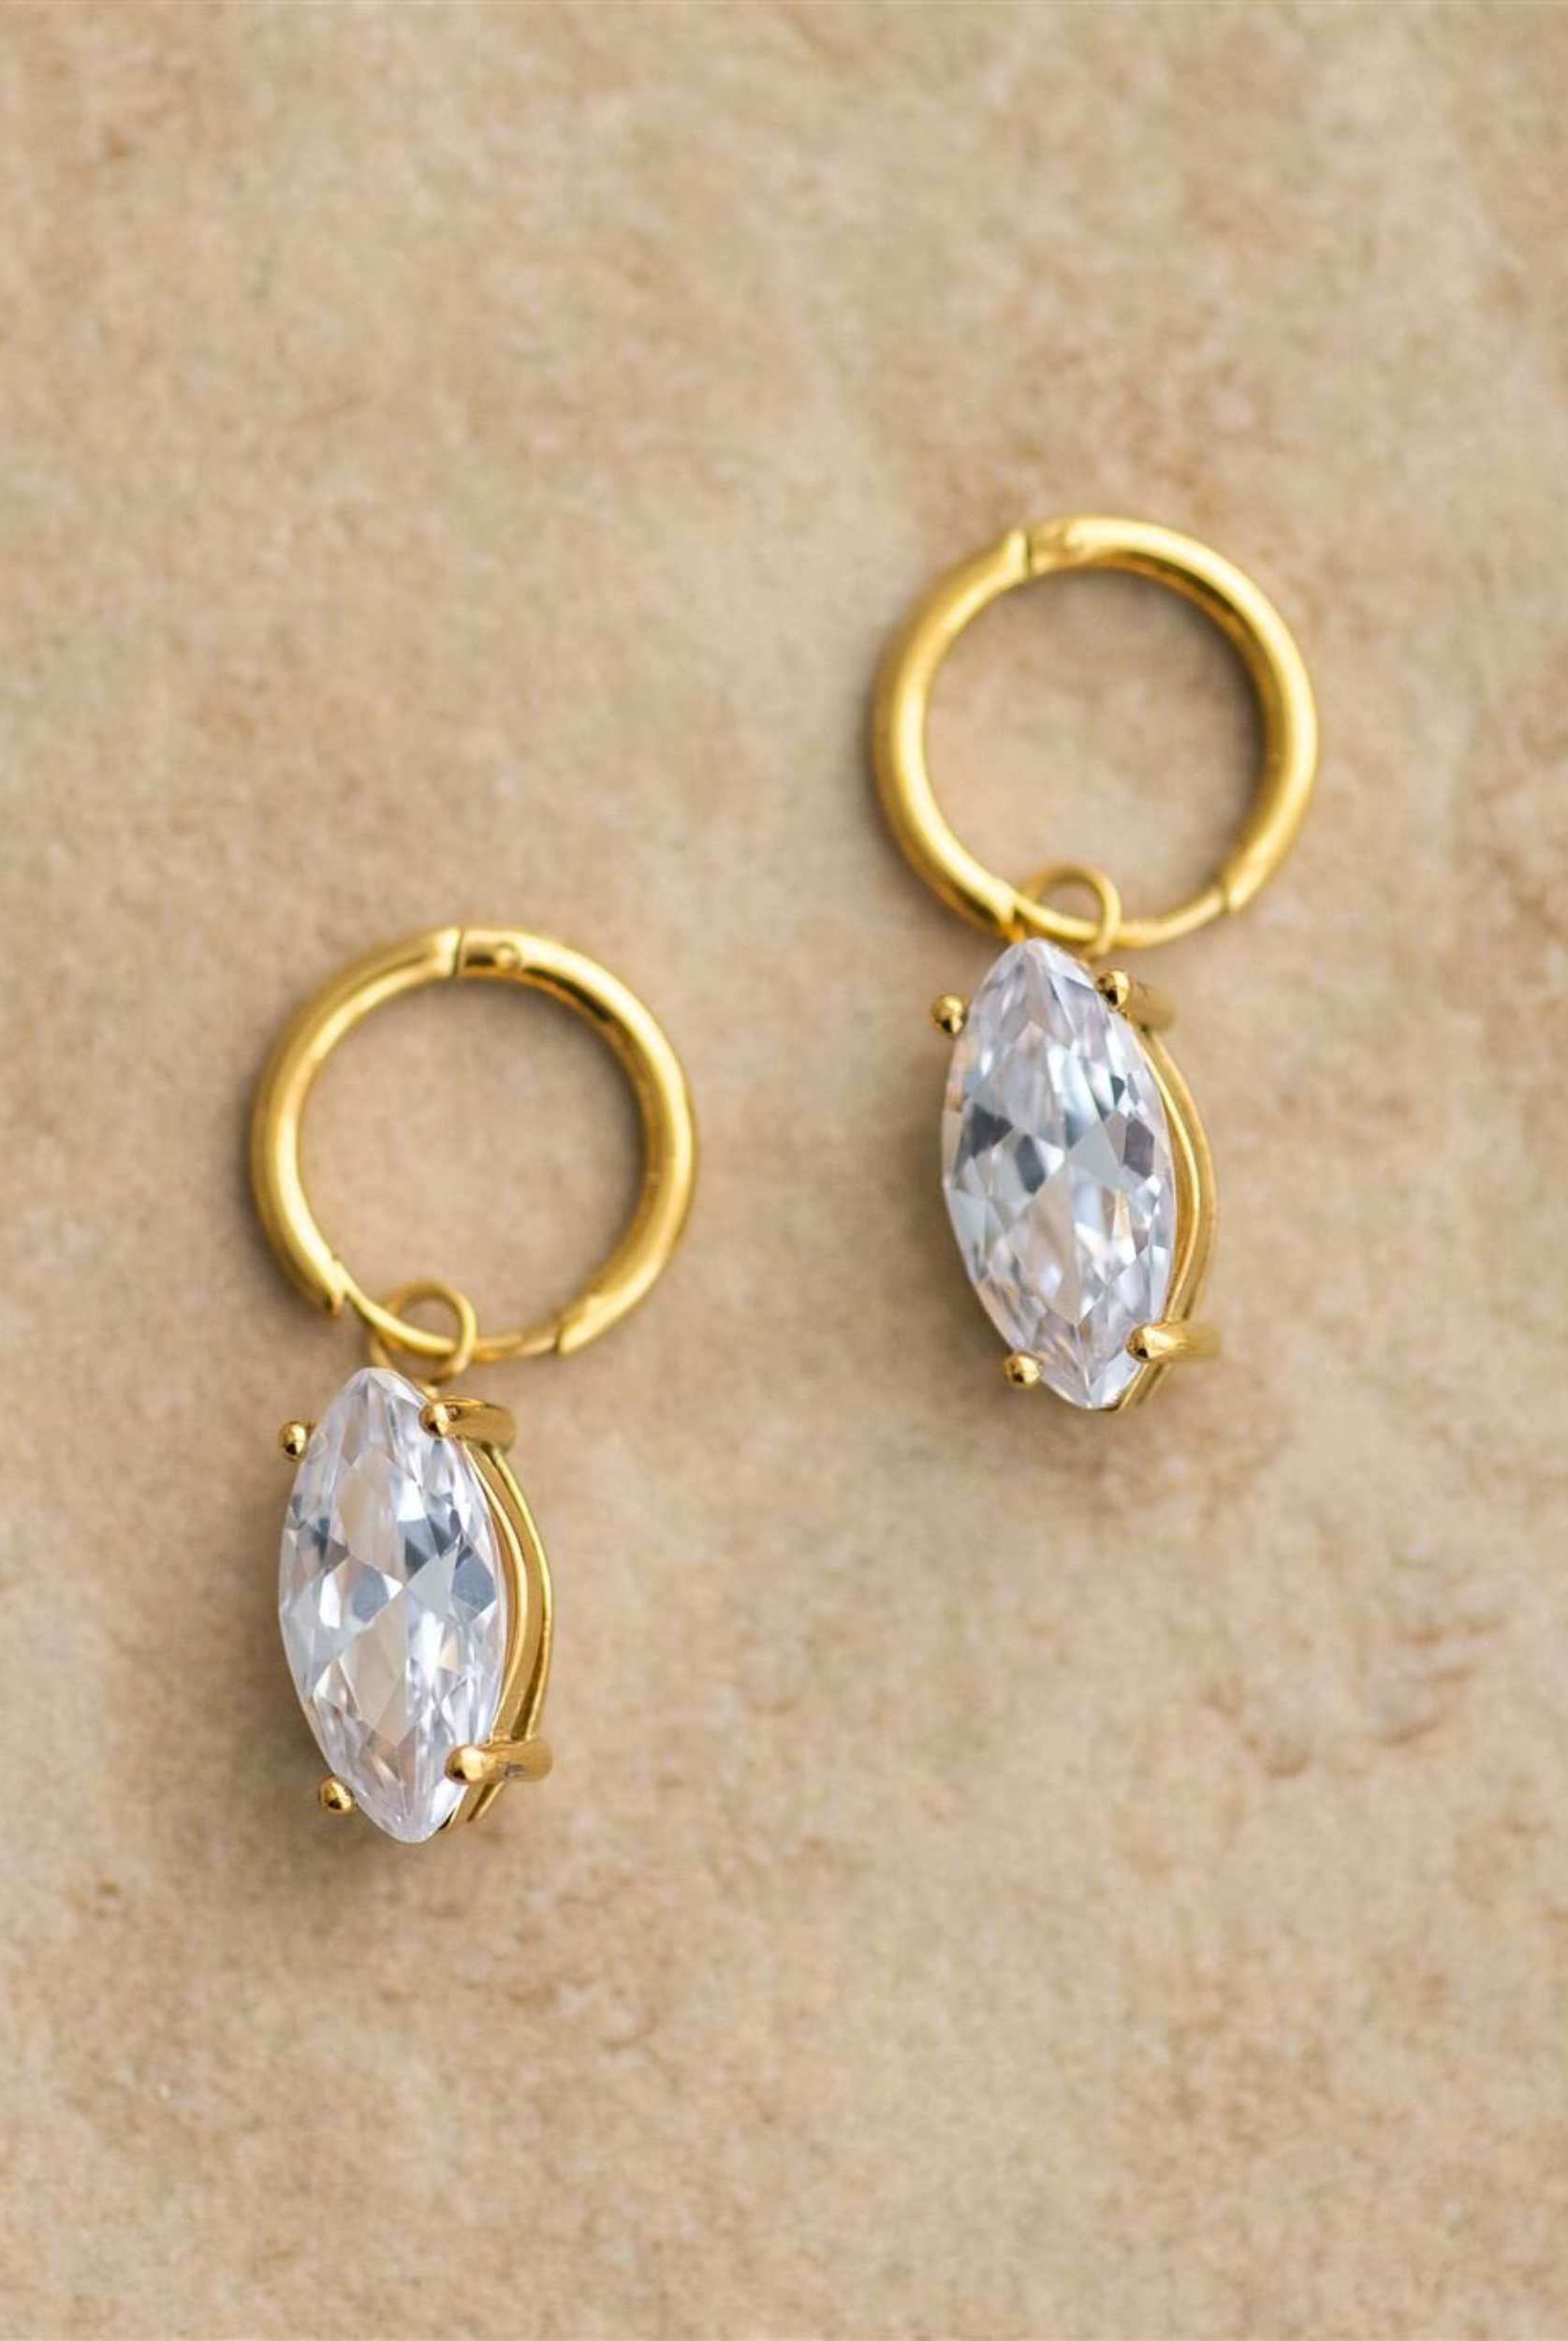 The Reef Gold Earrings from Indigo and Wolfe 